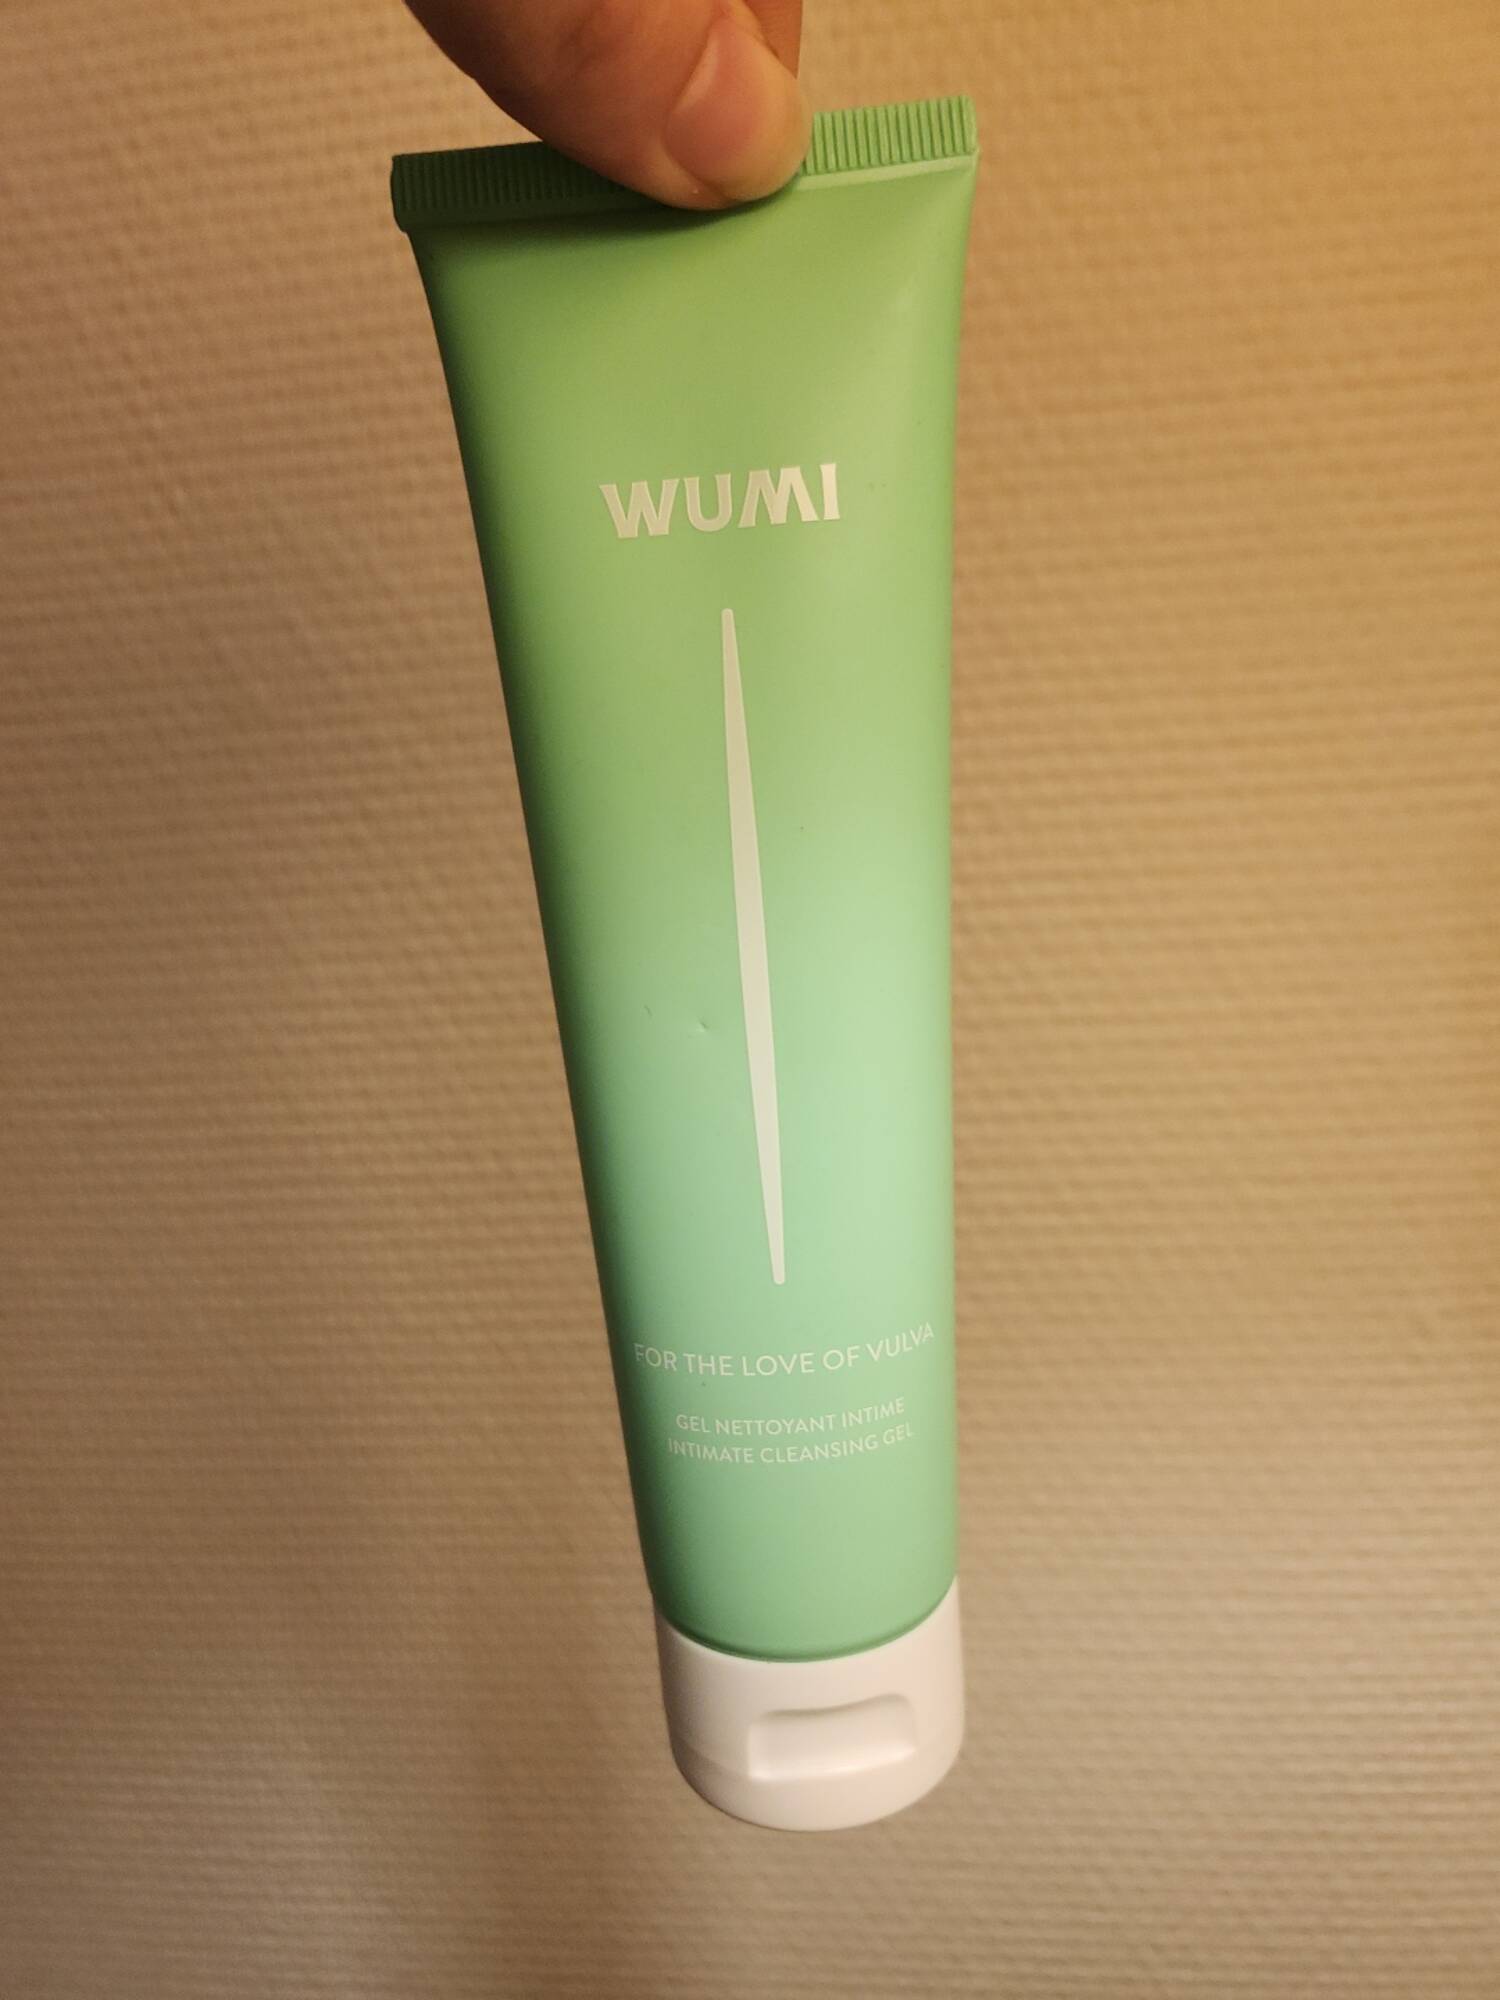 WUMI - For the love of vulva - Gel nettoyant intime